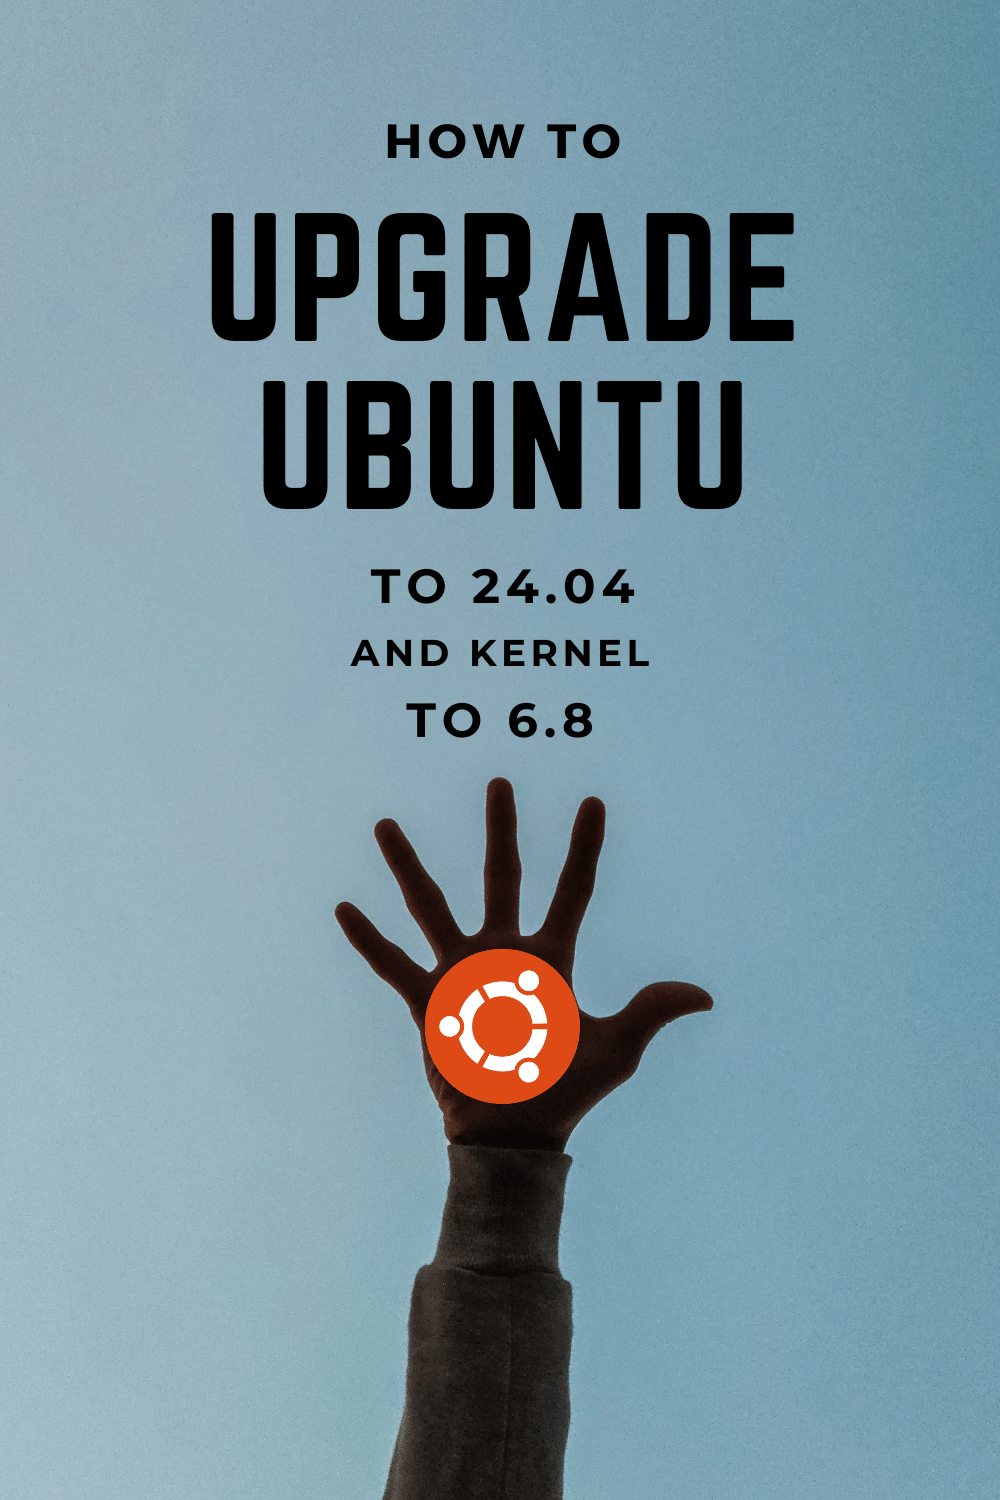 How to upgrade Ubuntu to 24.04 and kernel to latest version